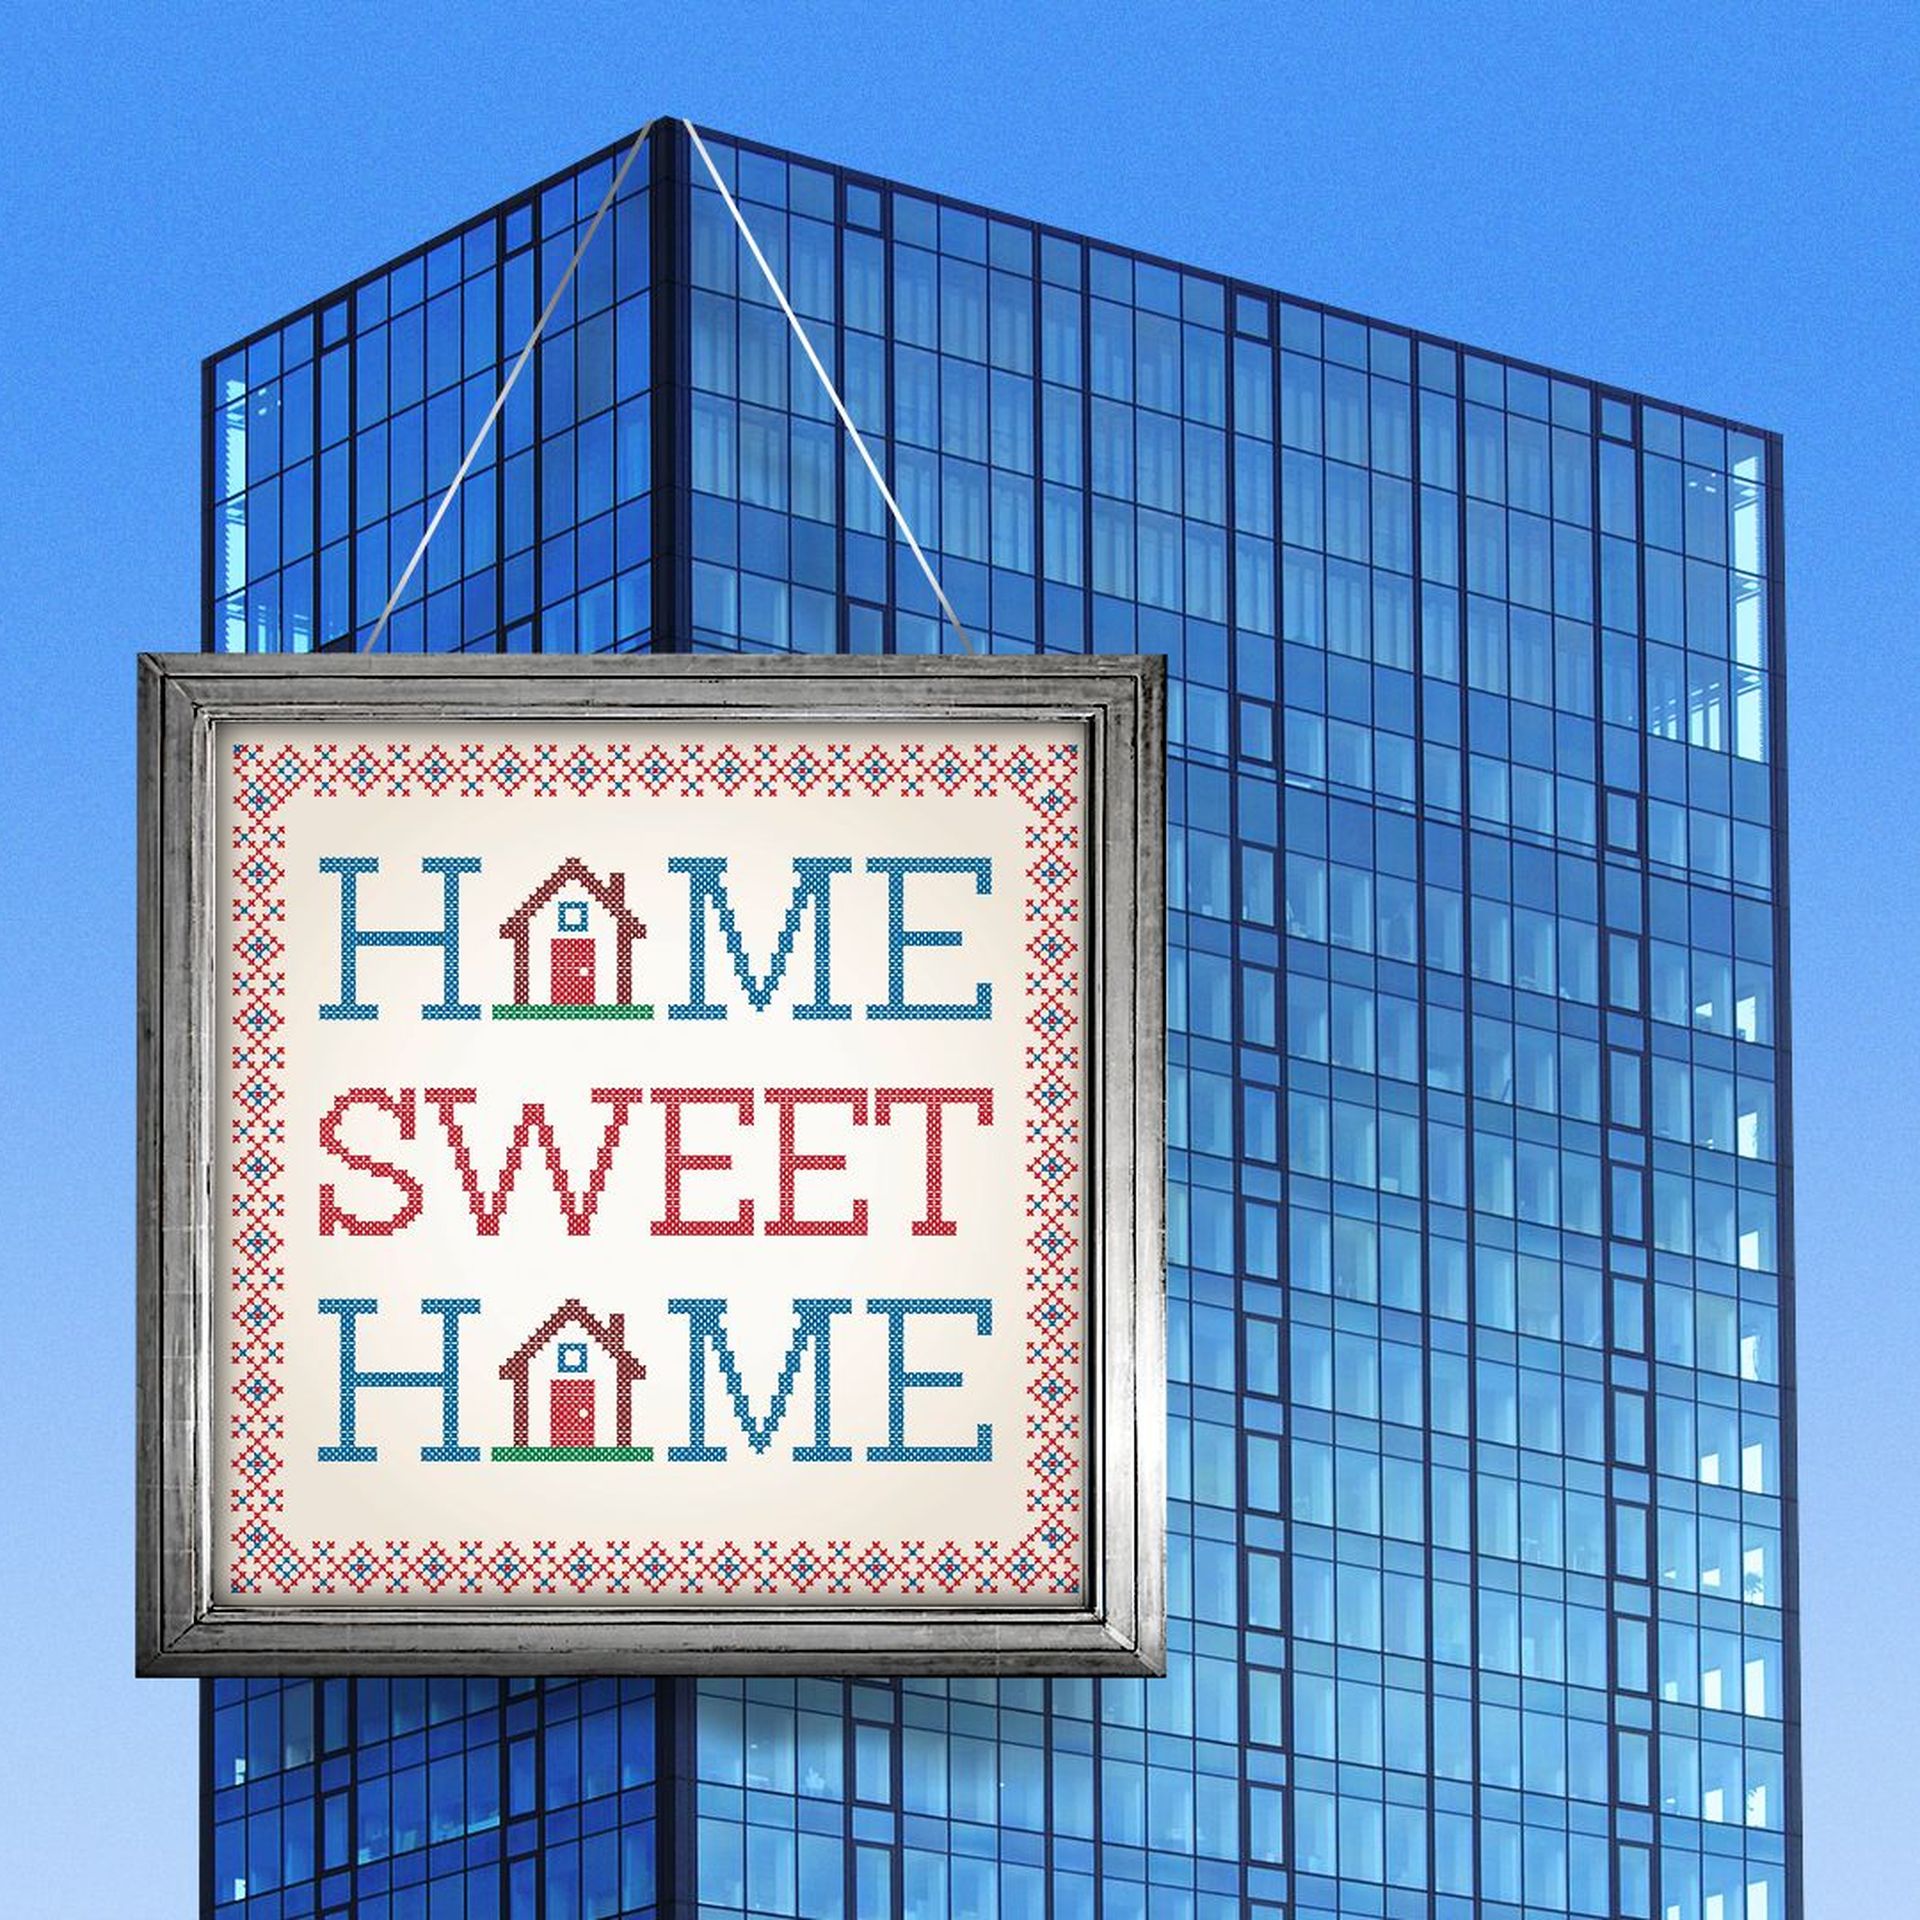 Illustration of a high-rise office building with an oversized "Home sweet home" embroidery piece framed and hanging from the roof